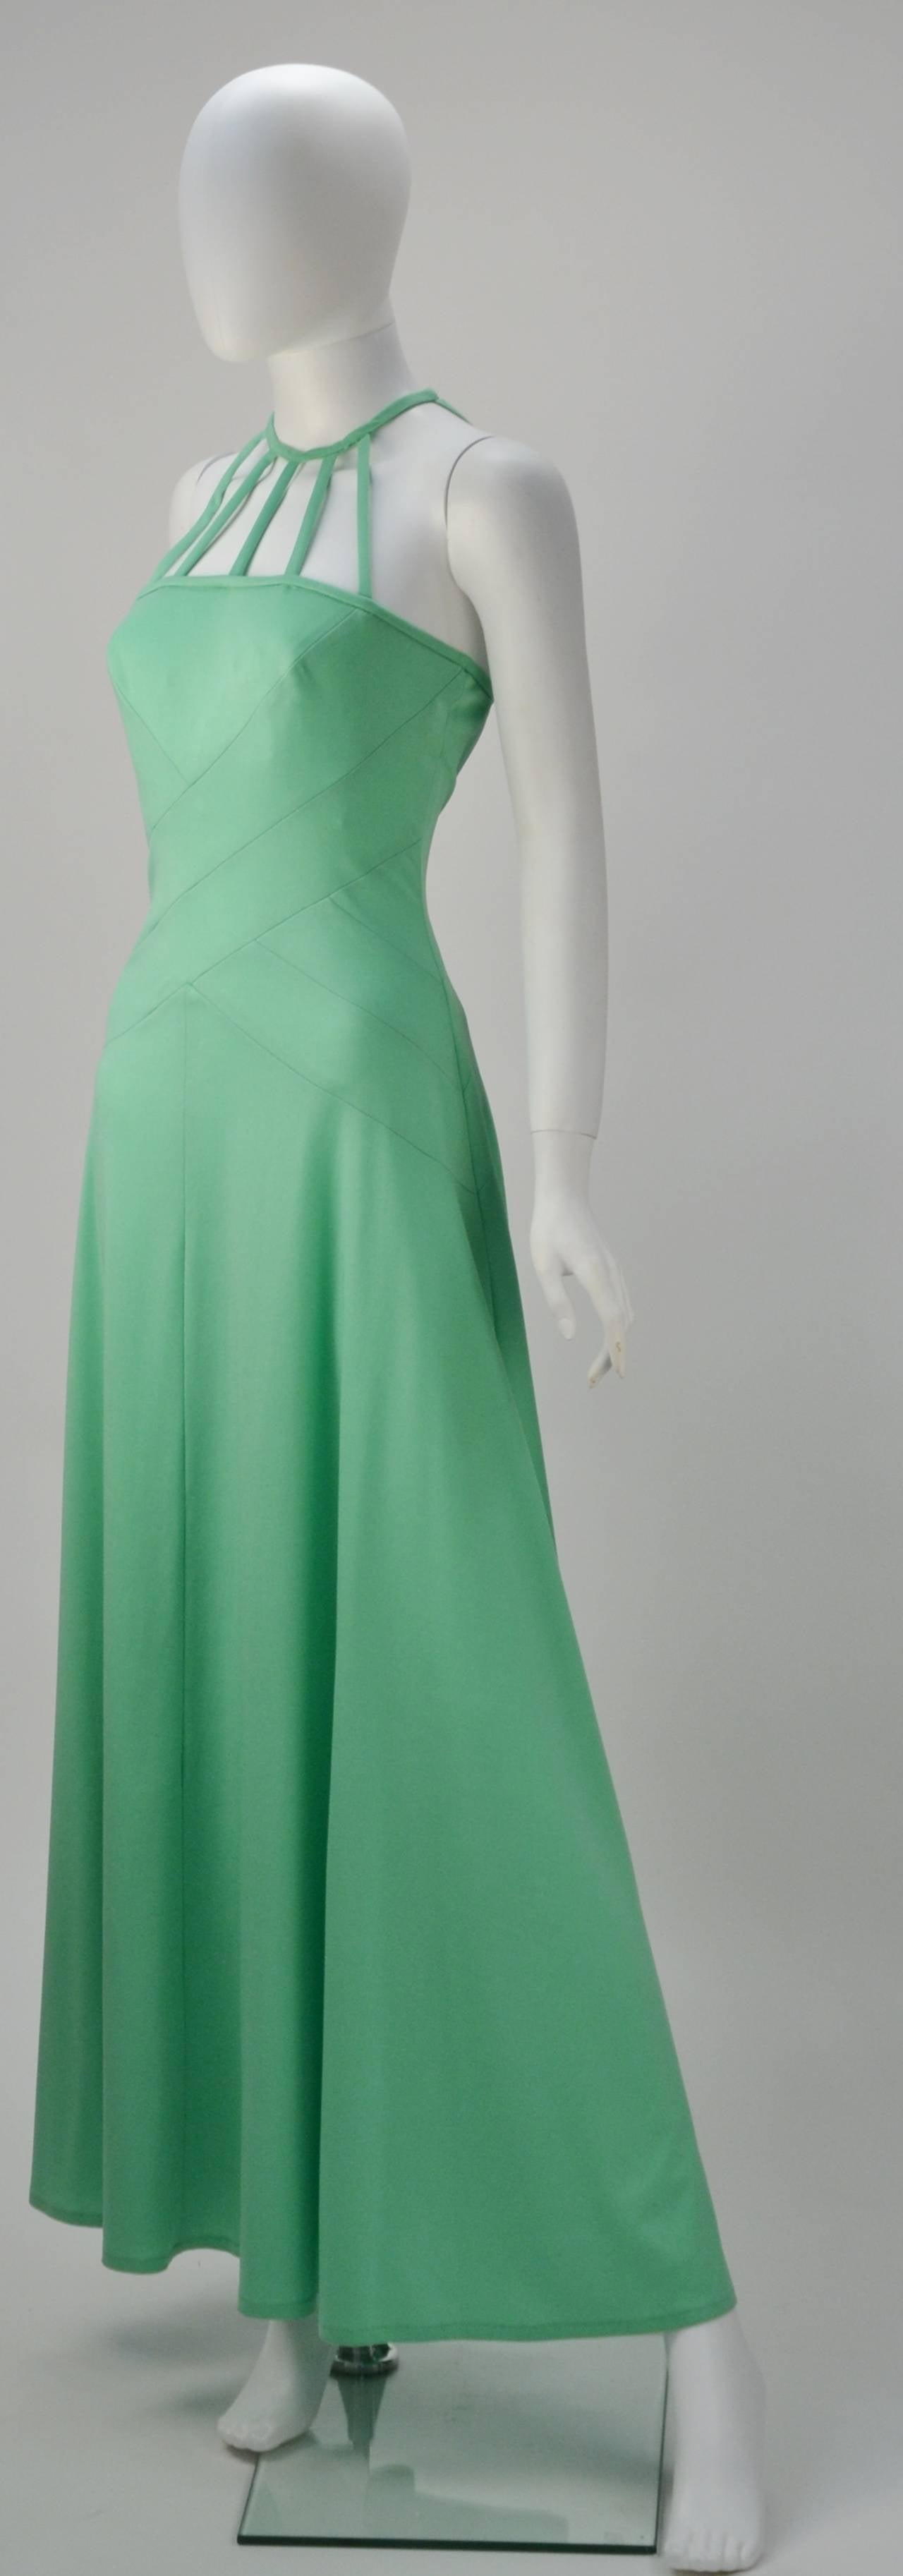 We can hear a tropical destination calling and this Gillian Paul mint green halter dress will be in the suitcase. Jersey with a back zippered closure, as well as two hook-n-eye closures. Uber sexy caged halter detail and the criss-crossed lines.